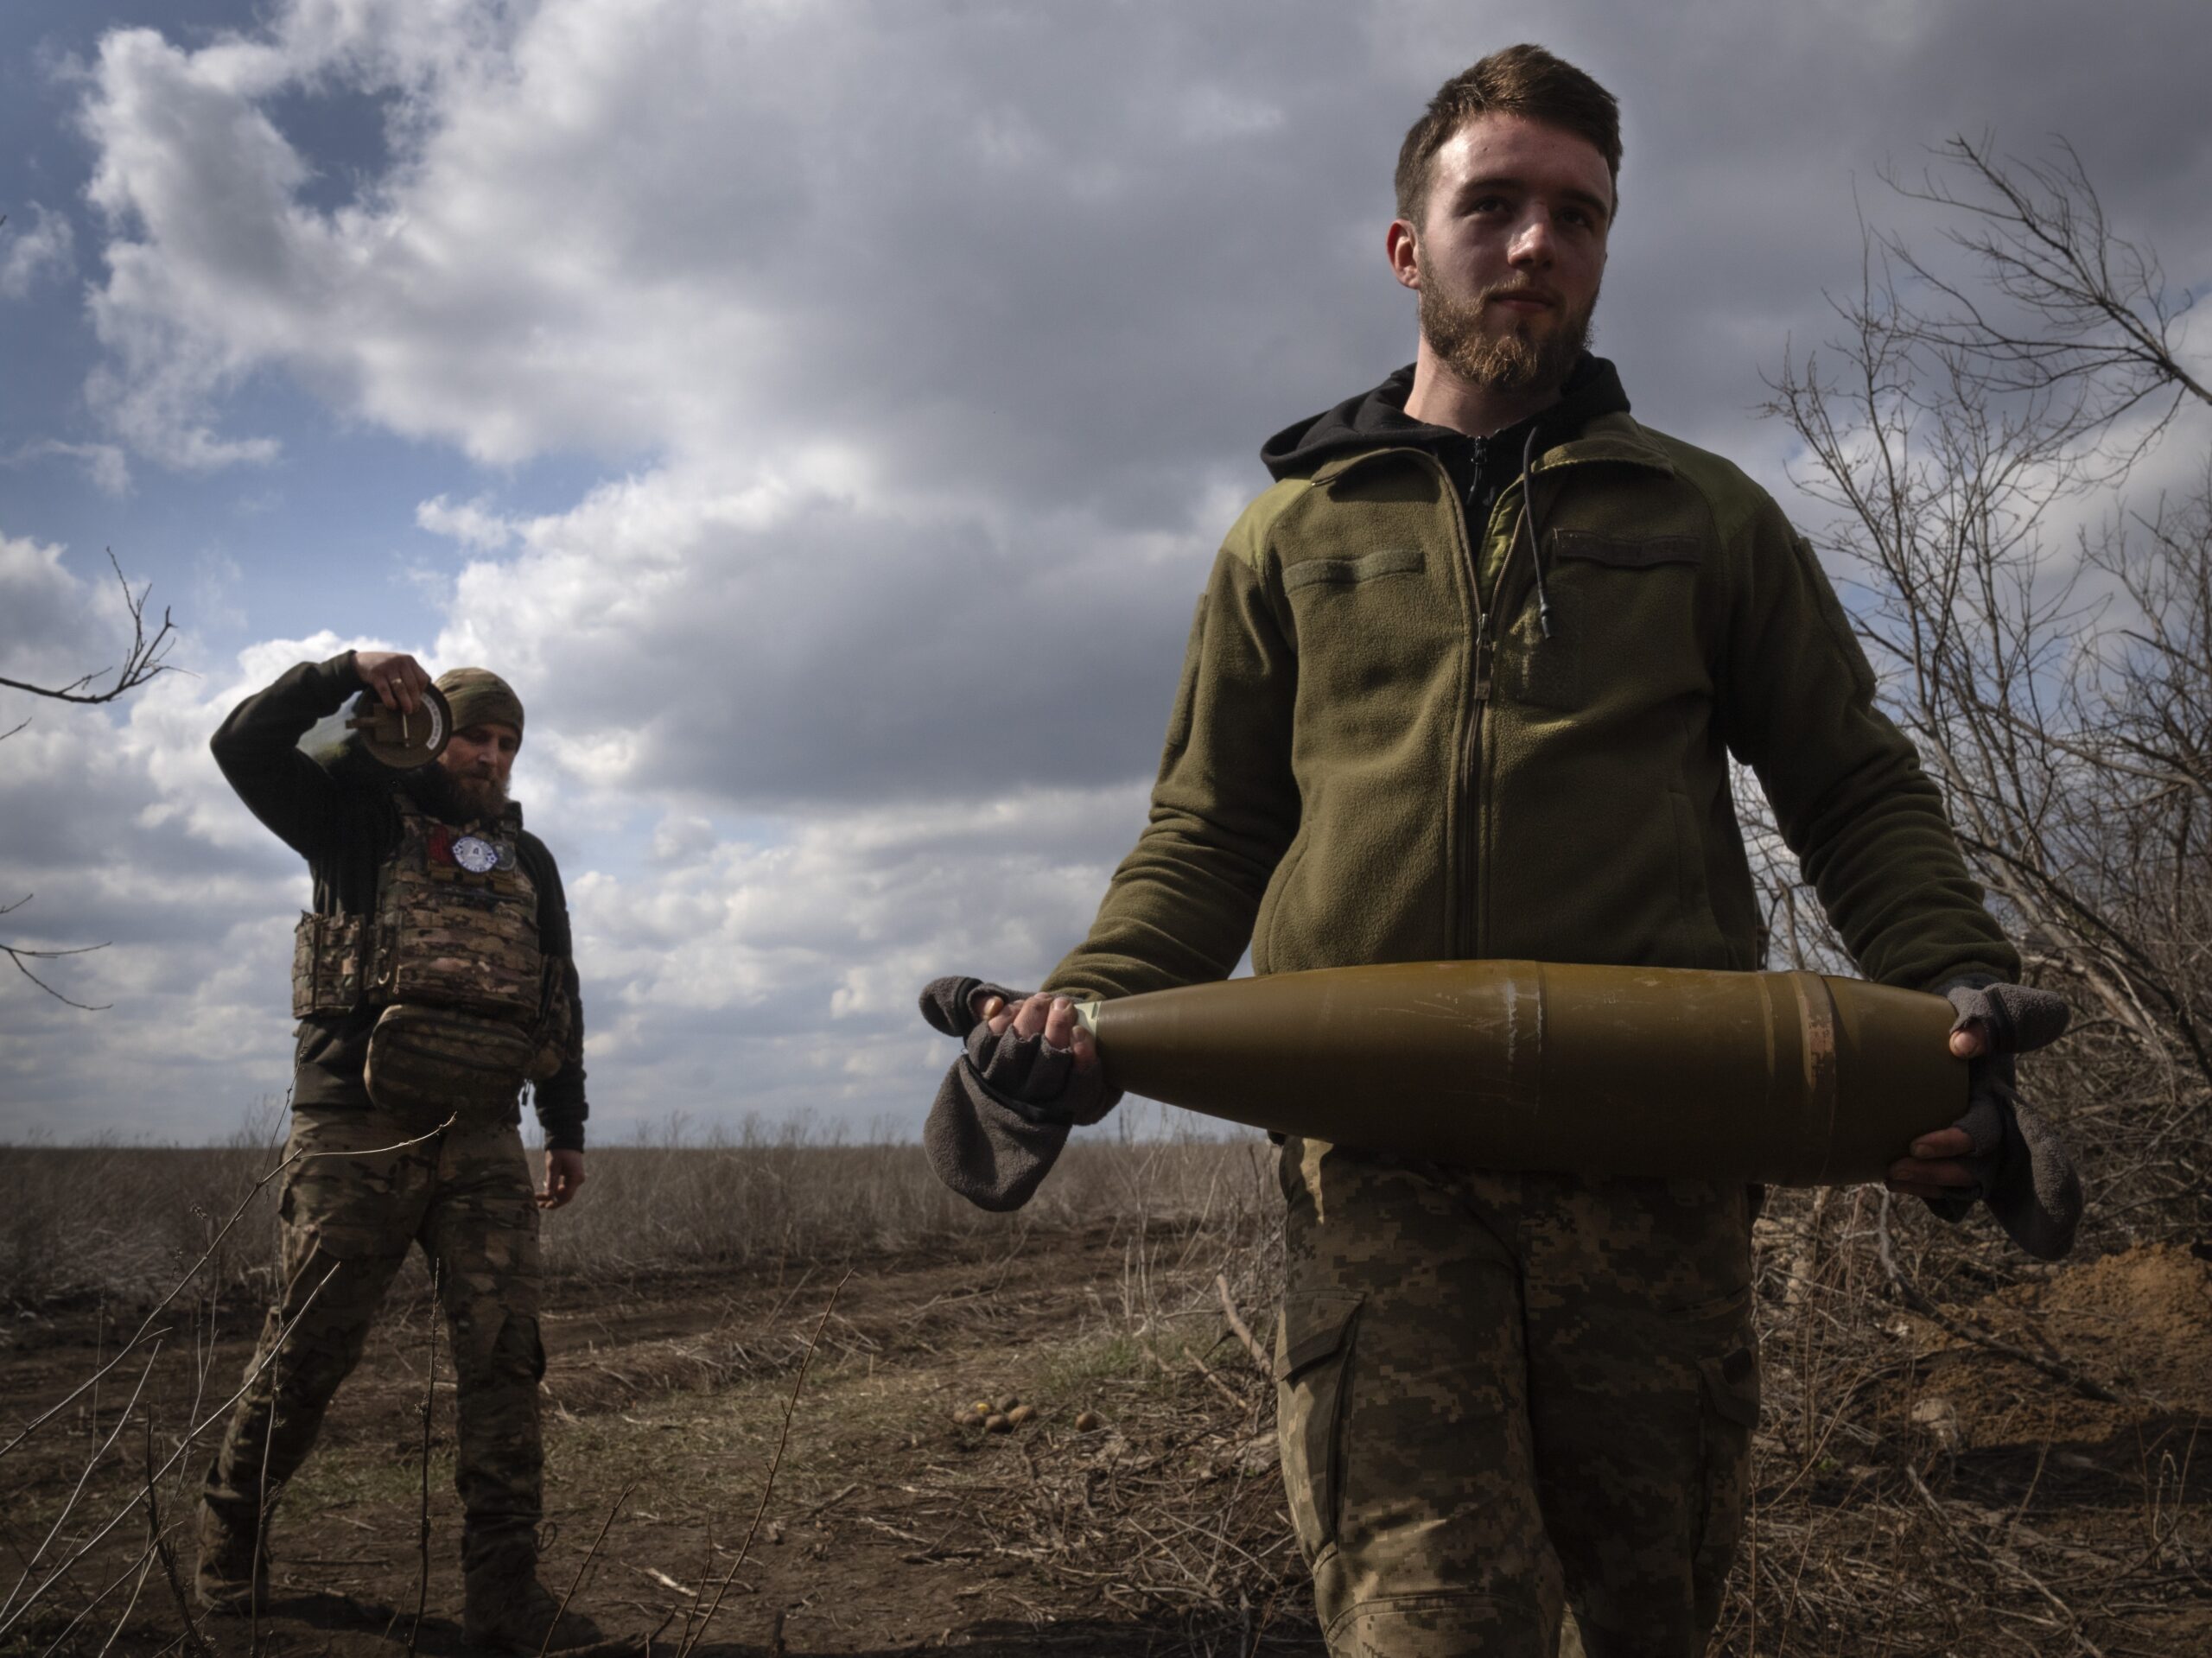 Ukrainian soldiers carry shells to fire at Russian positions on the front line, near the city of Bakhmut, in Ukraine's Donetsk region, on March 25. The outgunned and outnumbered Ukrainian troops have been struggling to halt Russian advances.